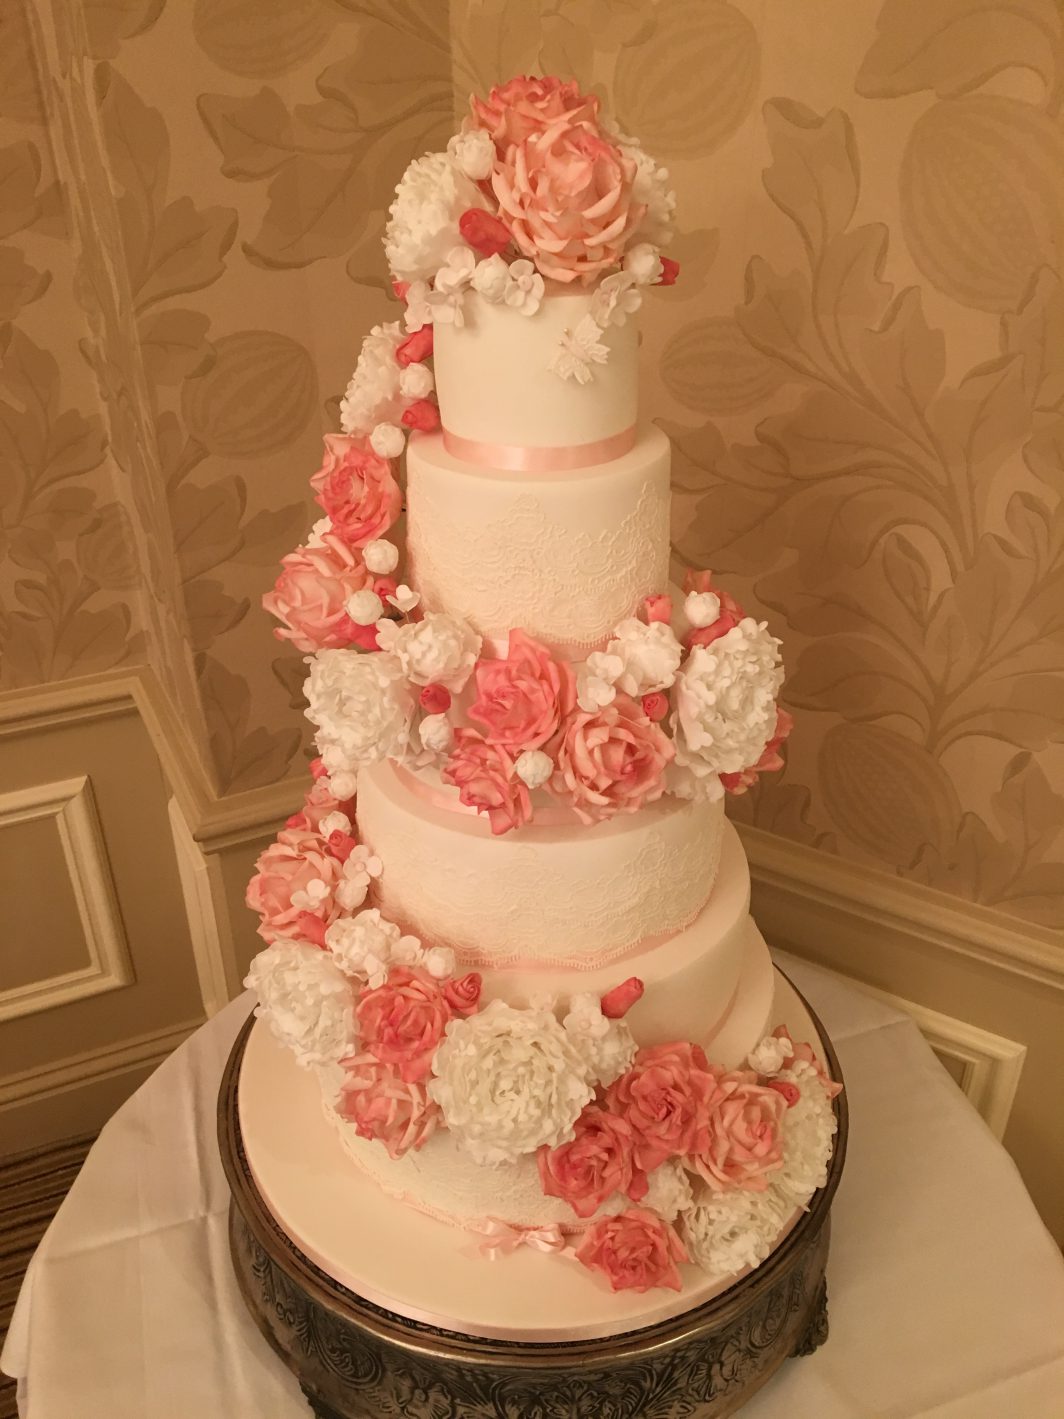 roses peonies and lace 6 tier wedding cake